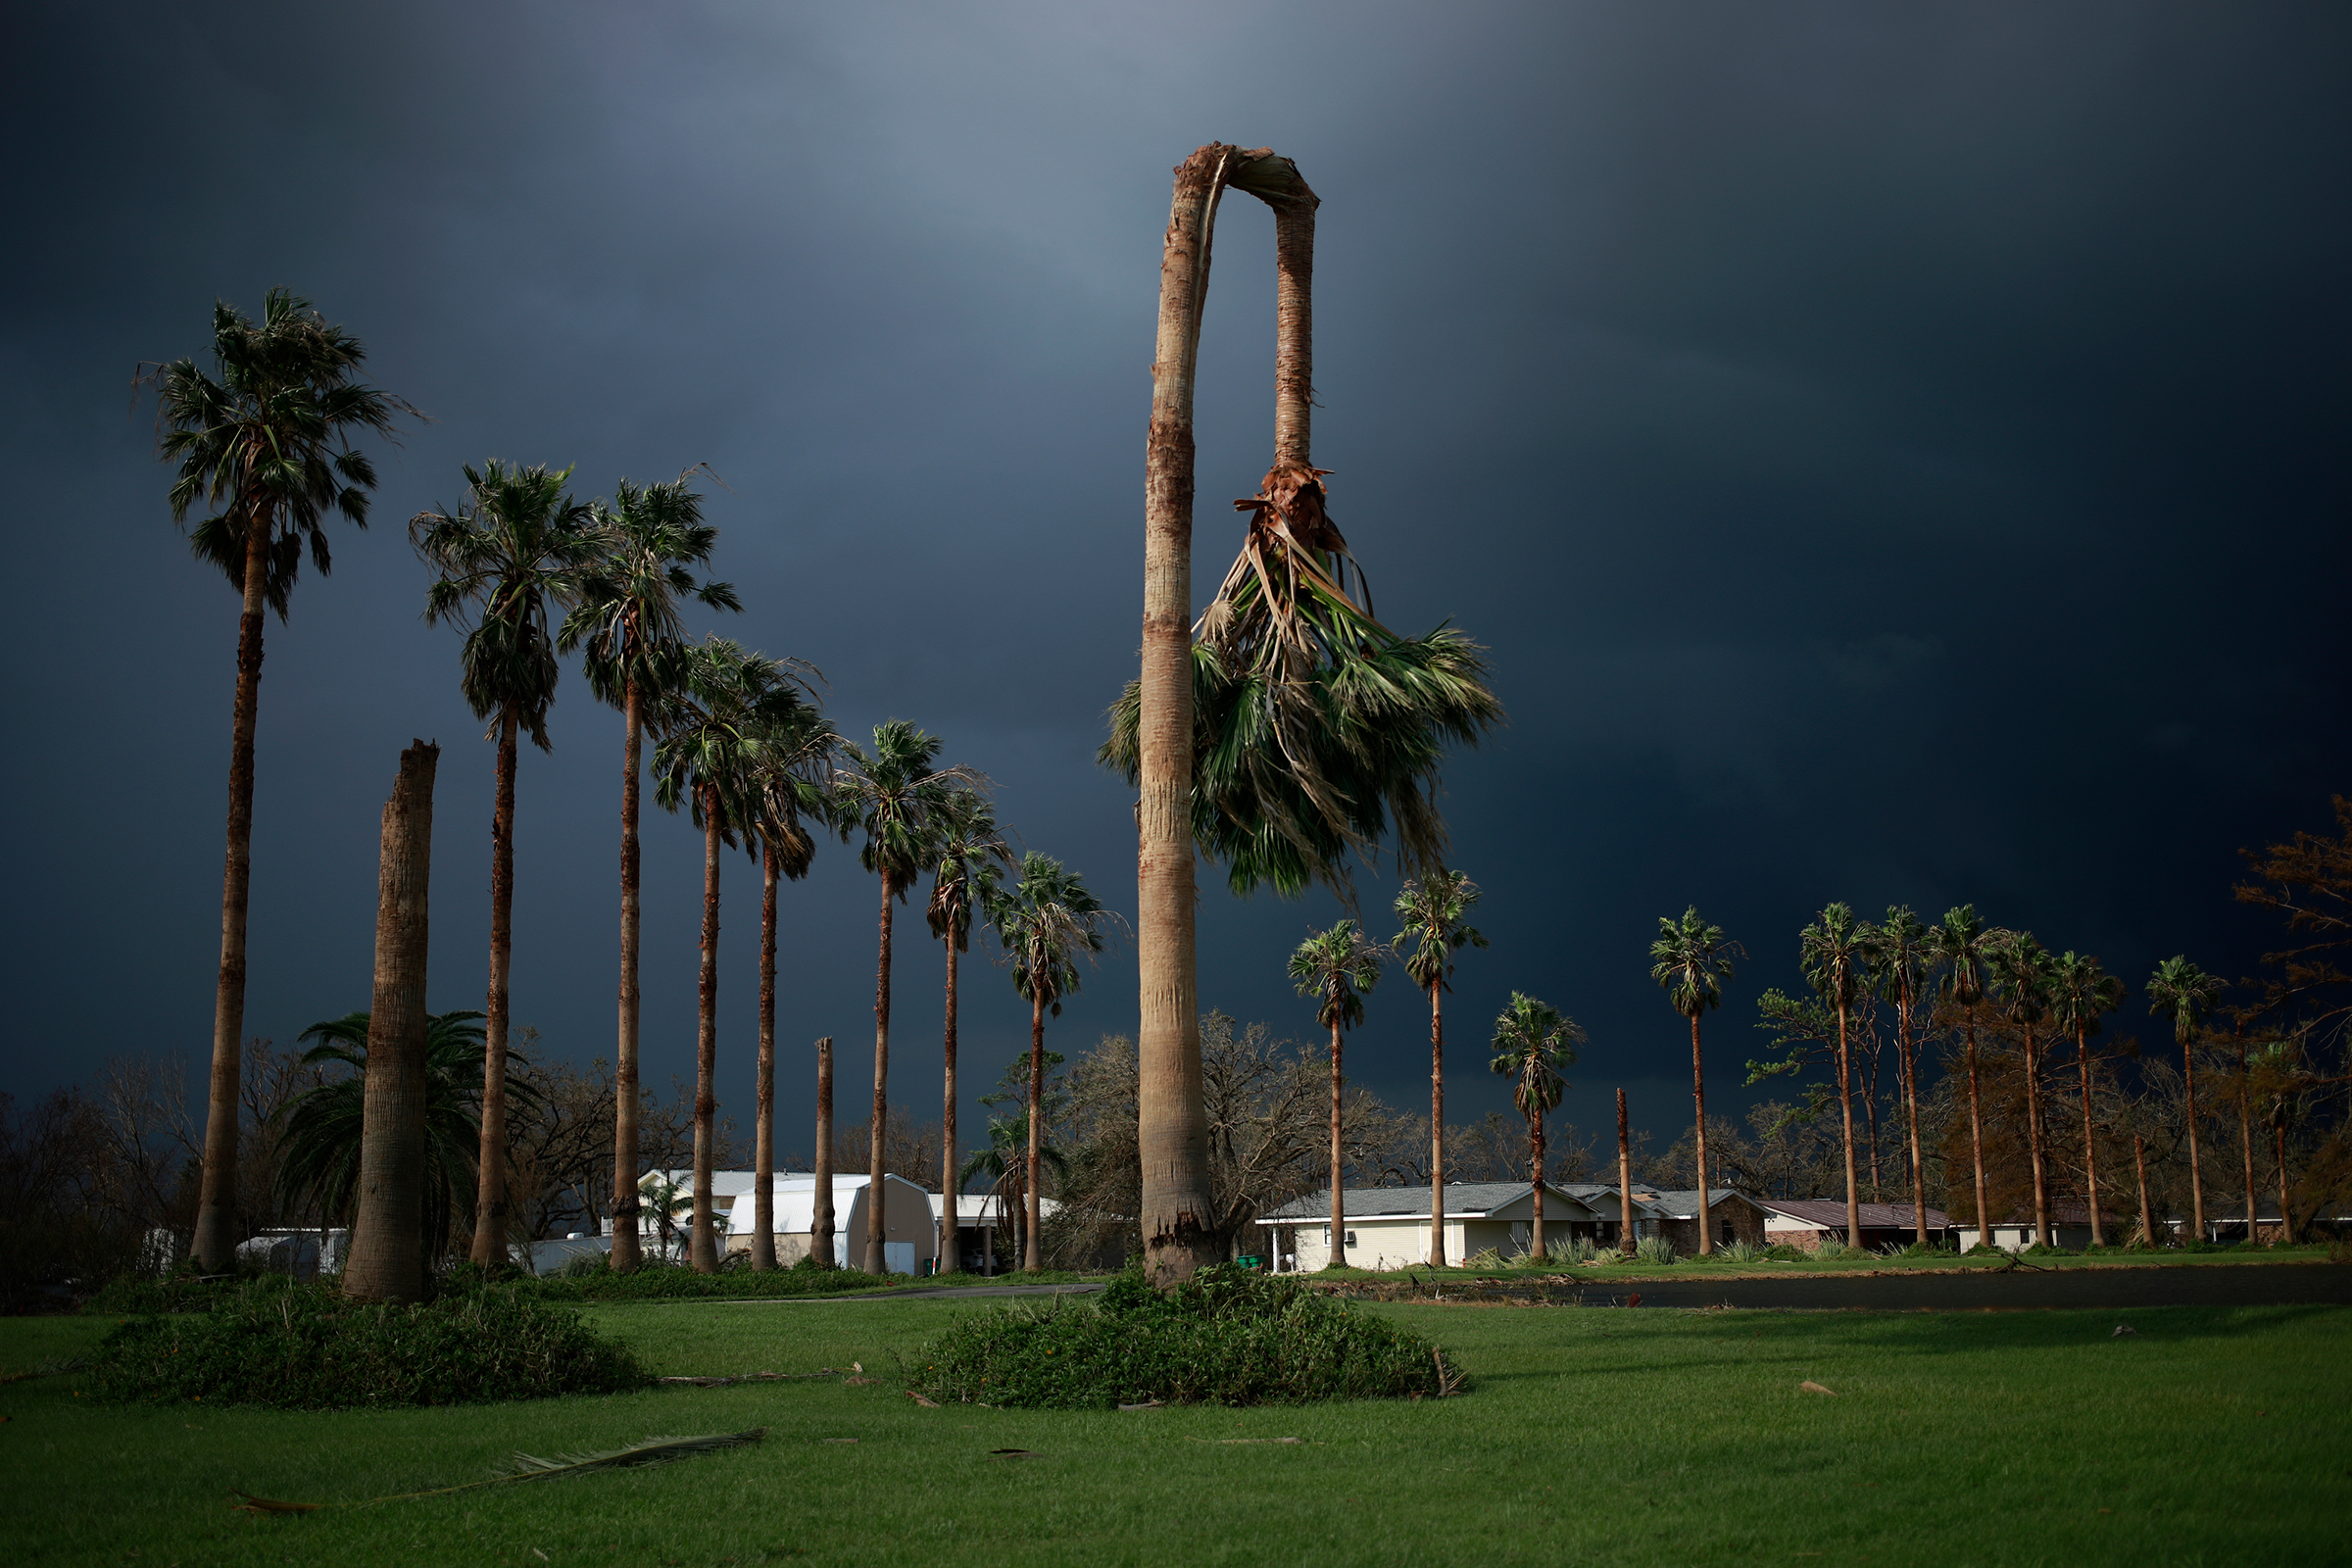 A palm tree damaged by Hurricane Ida in Galliano, La., on Aug. 31. More than a million people in New Orleans and beyond faced an immediate future without electricity during the summer heat after Ida, one of the most powerful hurricanes to ever make landfall in Louisiana, devastated the power infrastructure. (Luke Sharrett—Bloomberg/Getty Images)